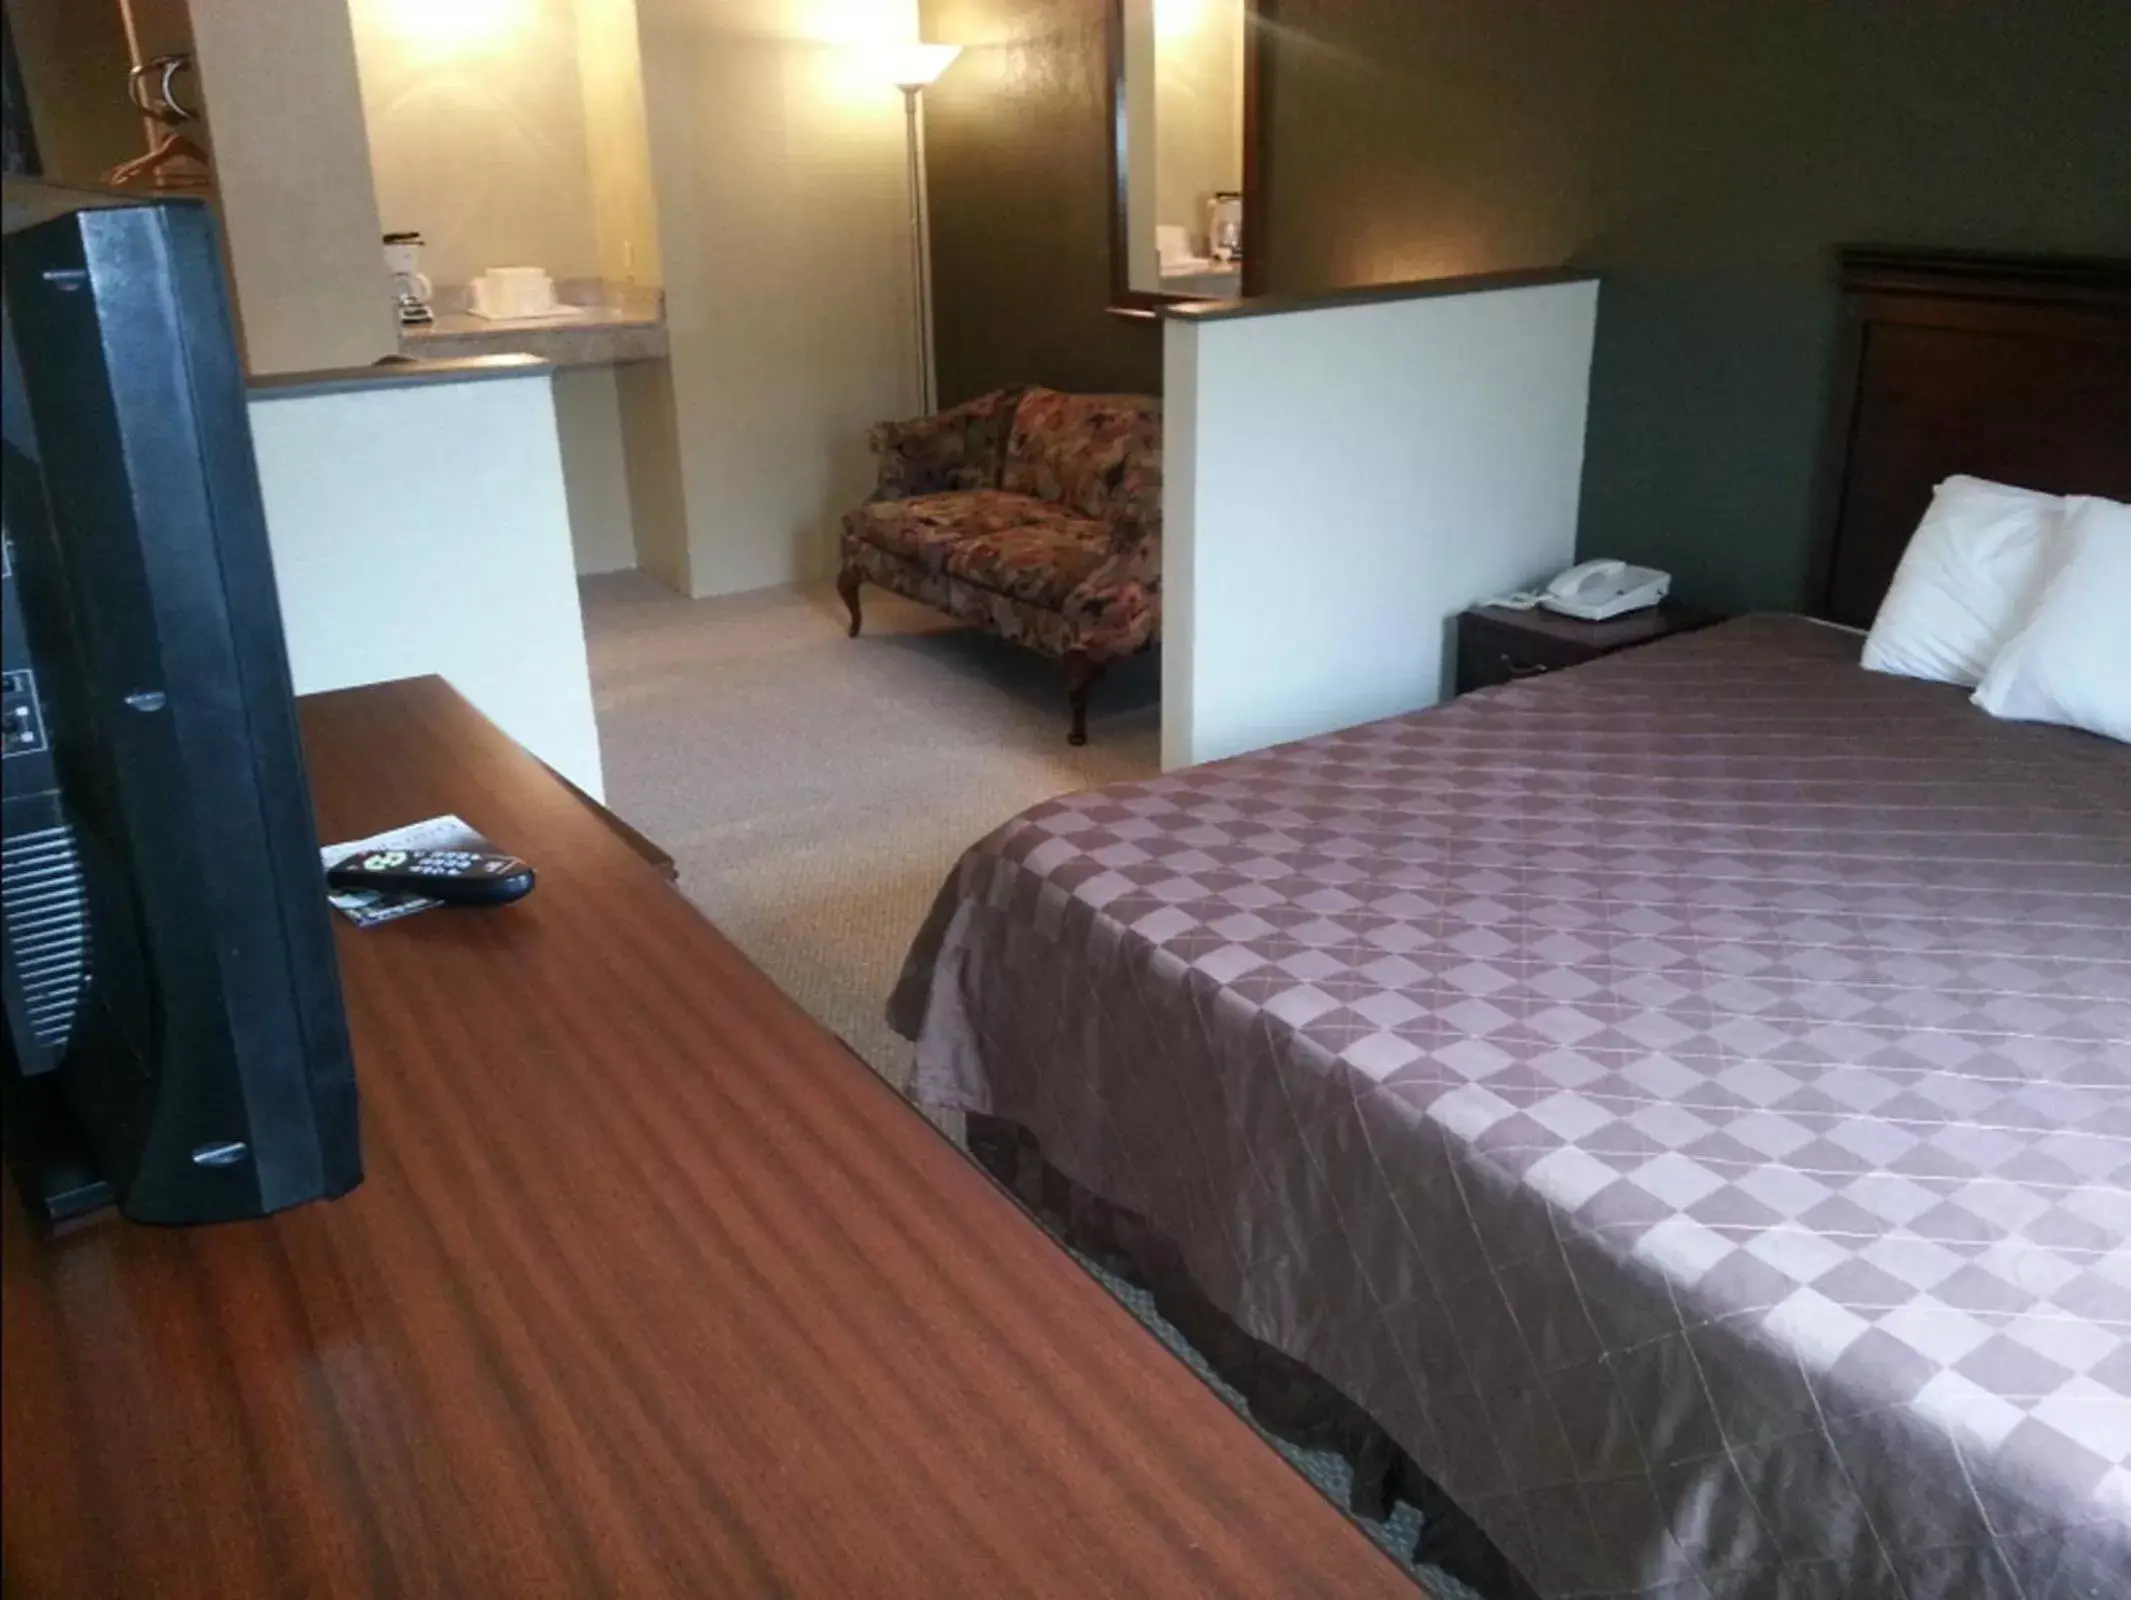 View (from property/room), Bed in Americourt Hotel and Suites - Elizabethton